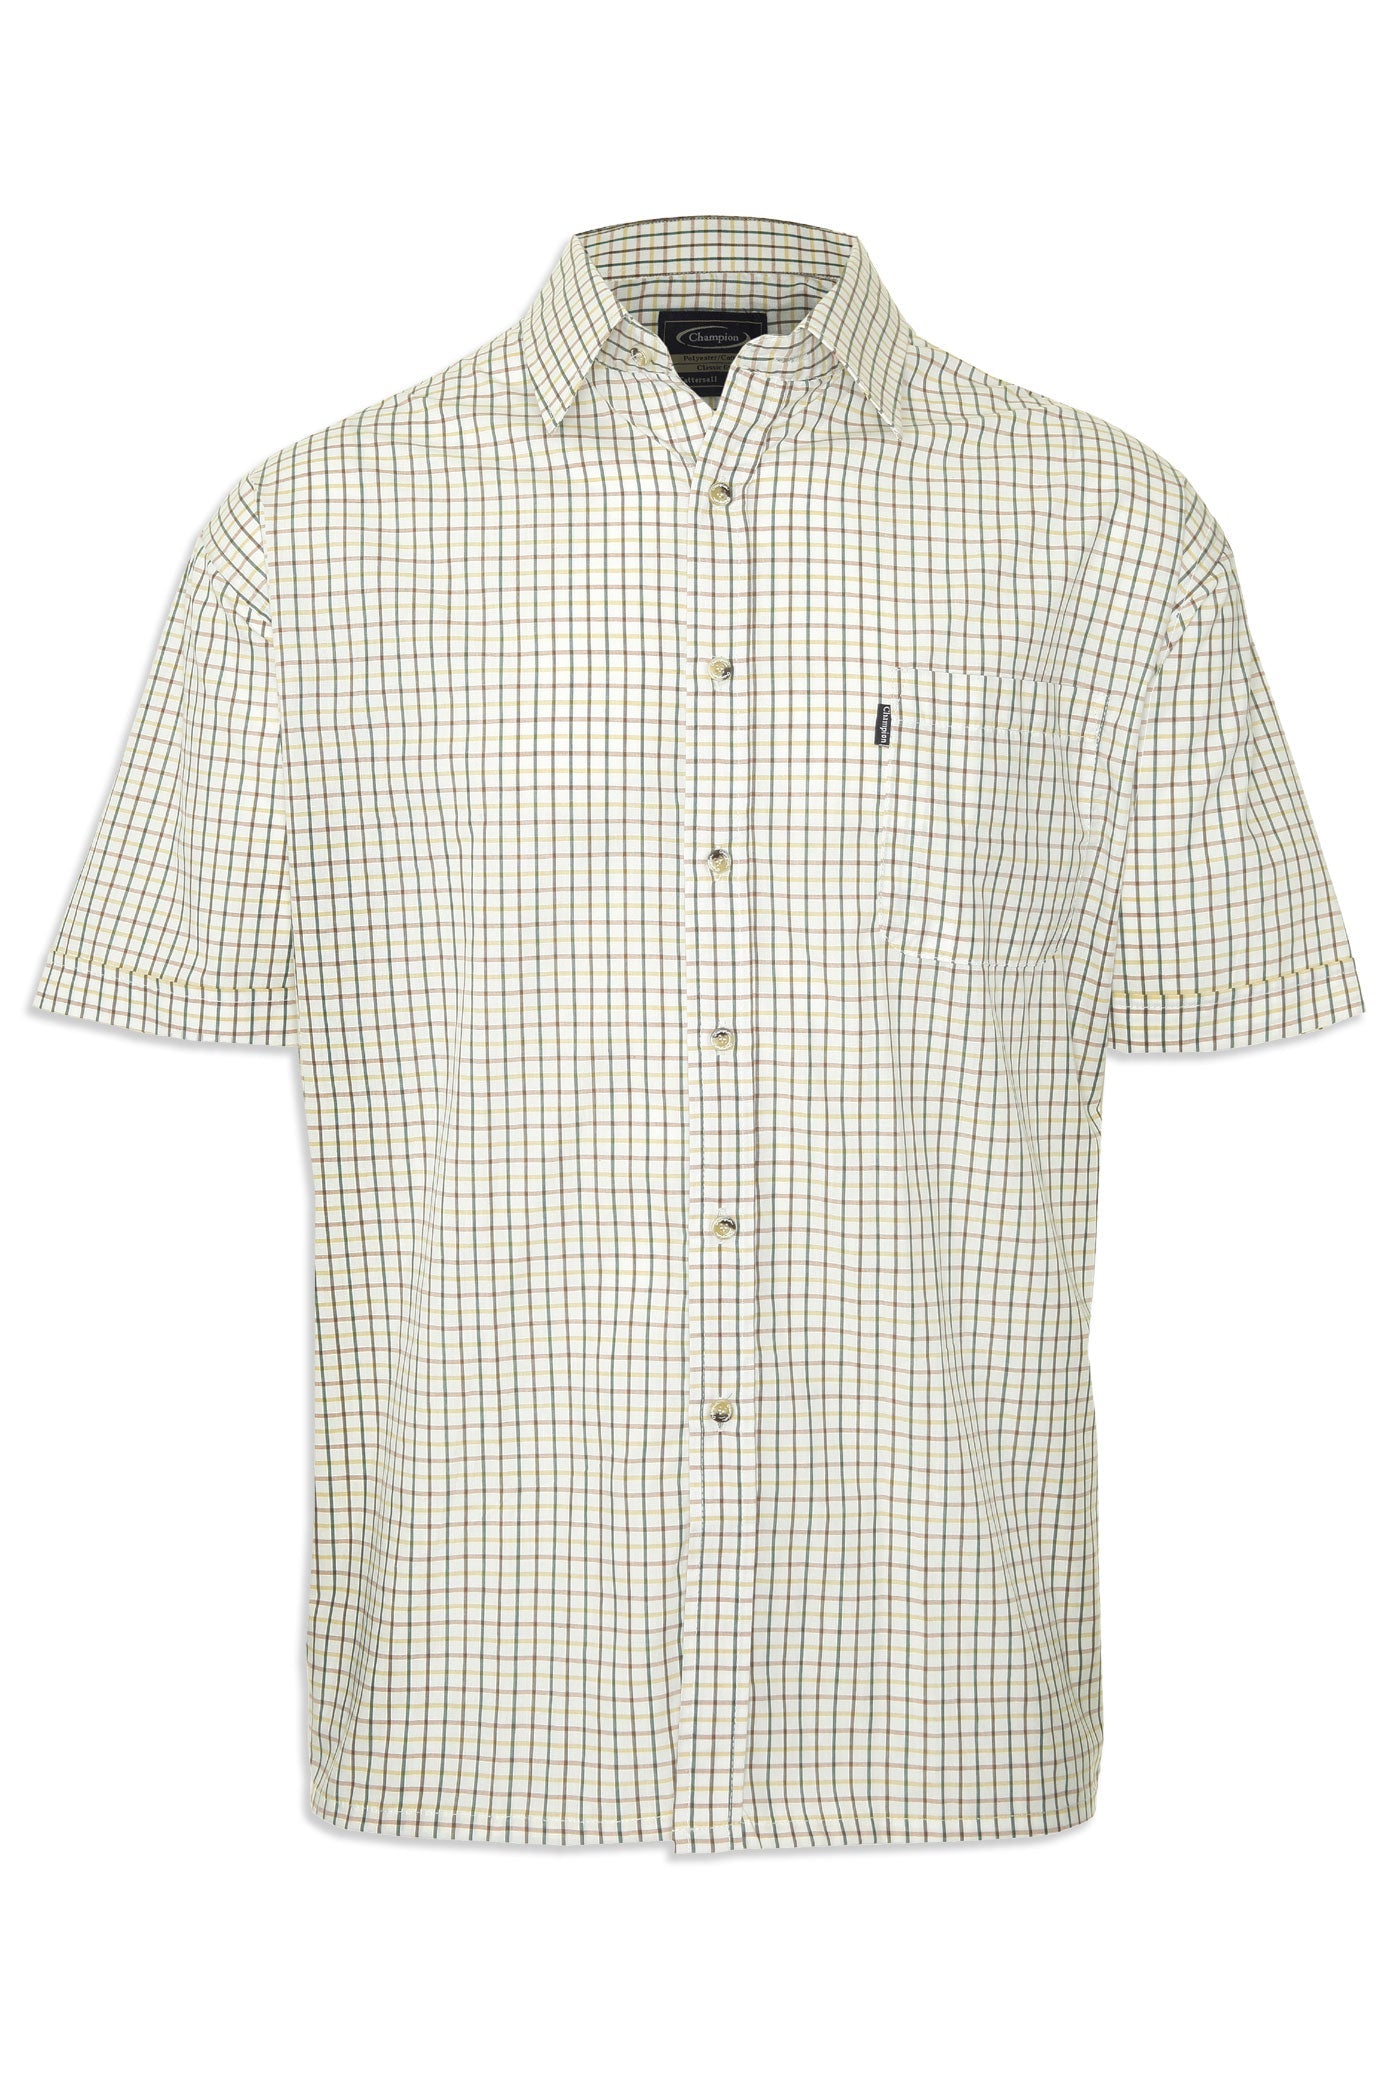 green check Champion summer Tattersall, the classic country tattersall check shirt with short sleeves, ideal for summer